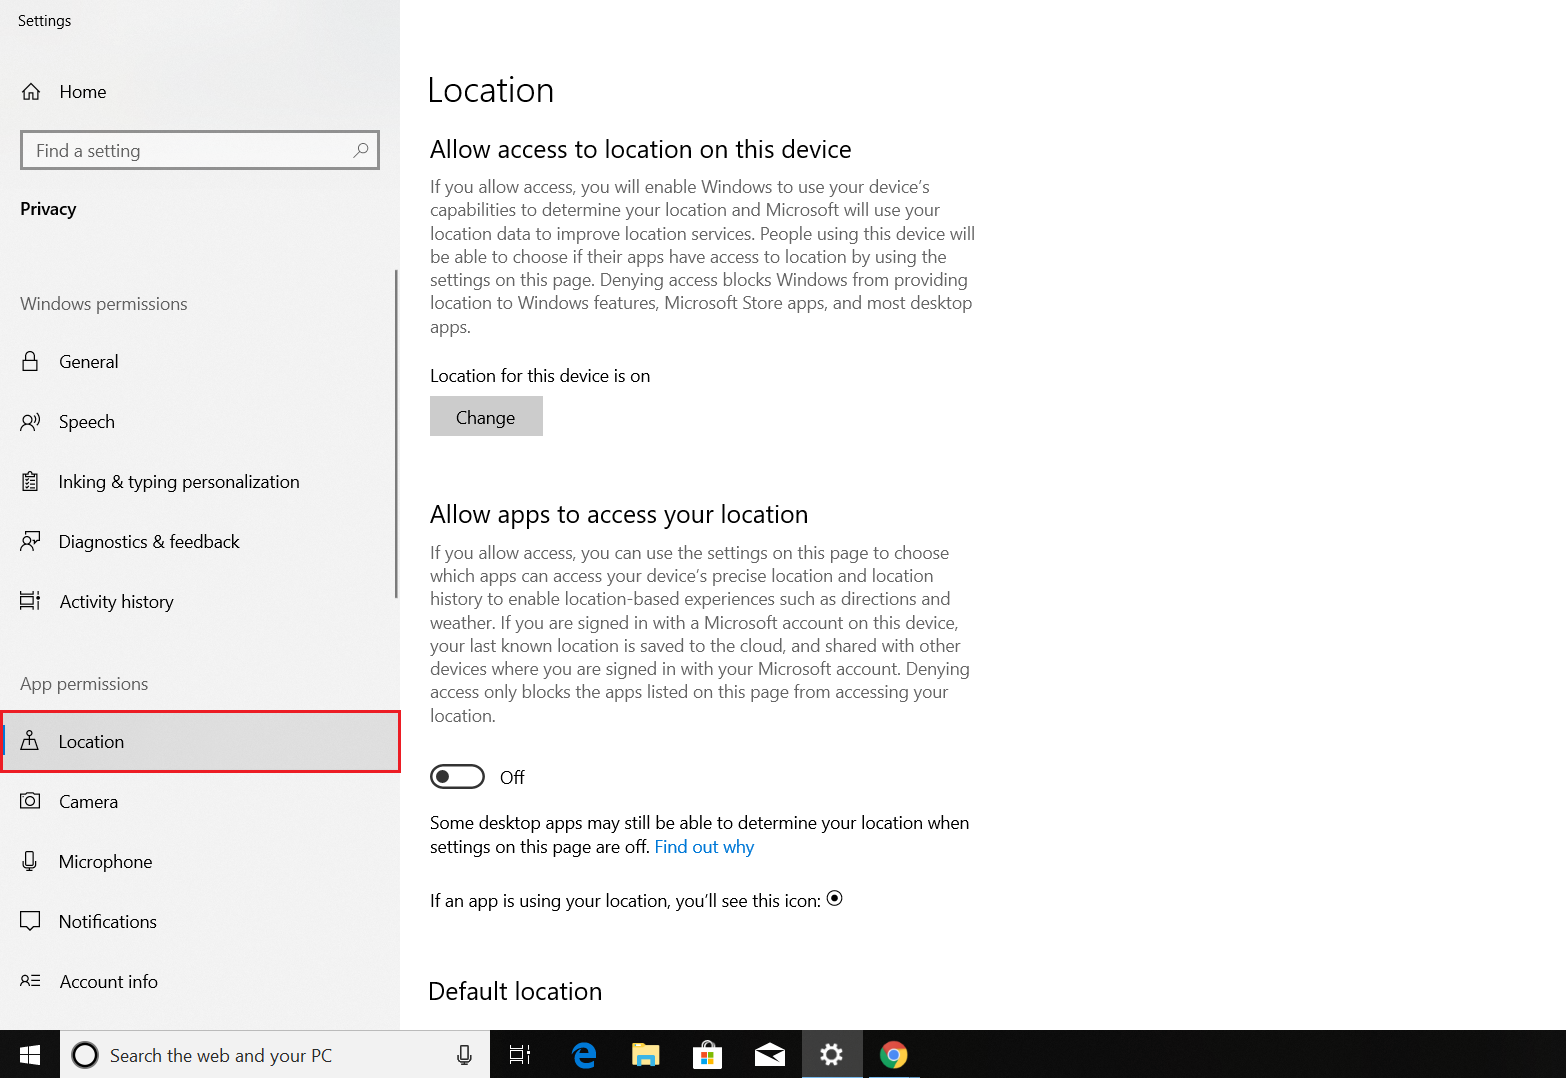 Enabling Location Services on Windows 10 devices for Geotracking